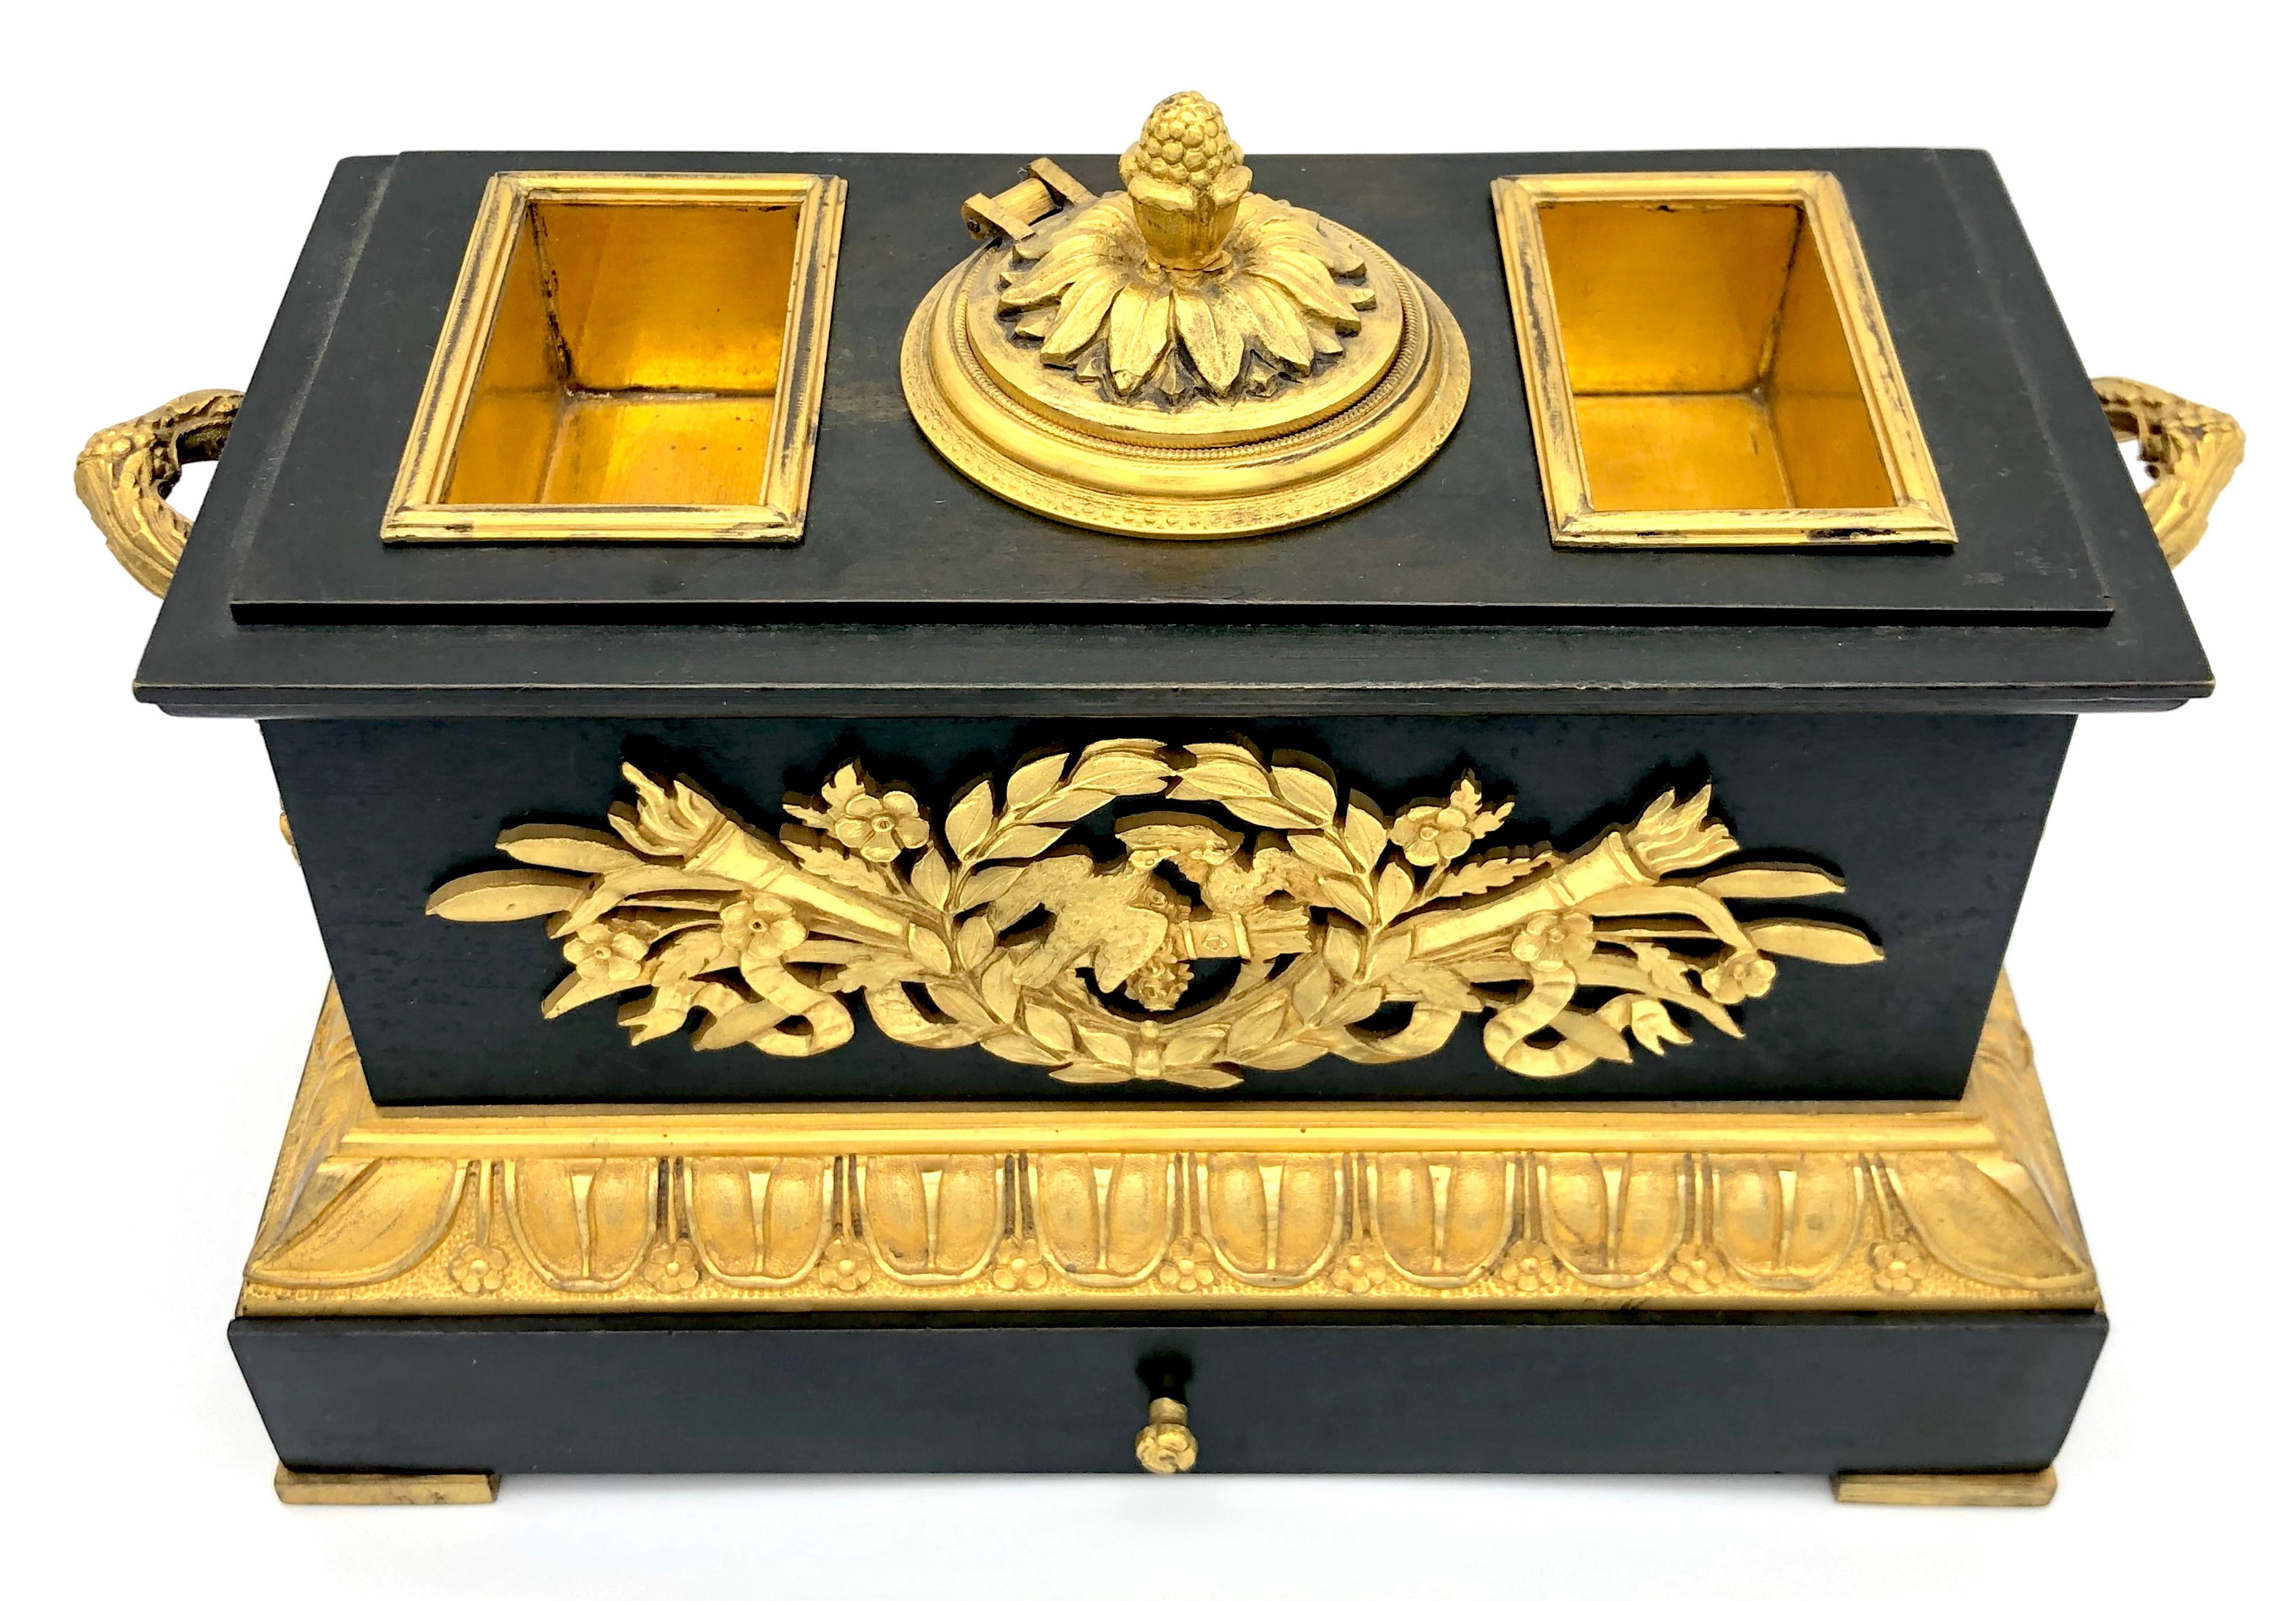 Excepional patinated bronze inkstand in the shape of a cascet on a pedestal with a drawer. It has exquisitely cast ormolu applications depicting lovers symbolic within a wreth, i.e. torches, doves, arrows in their quiver, but also flowers, leaves